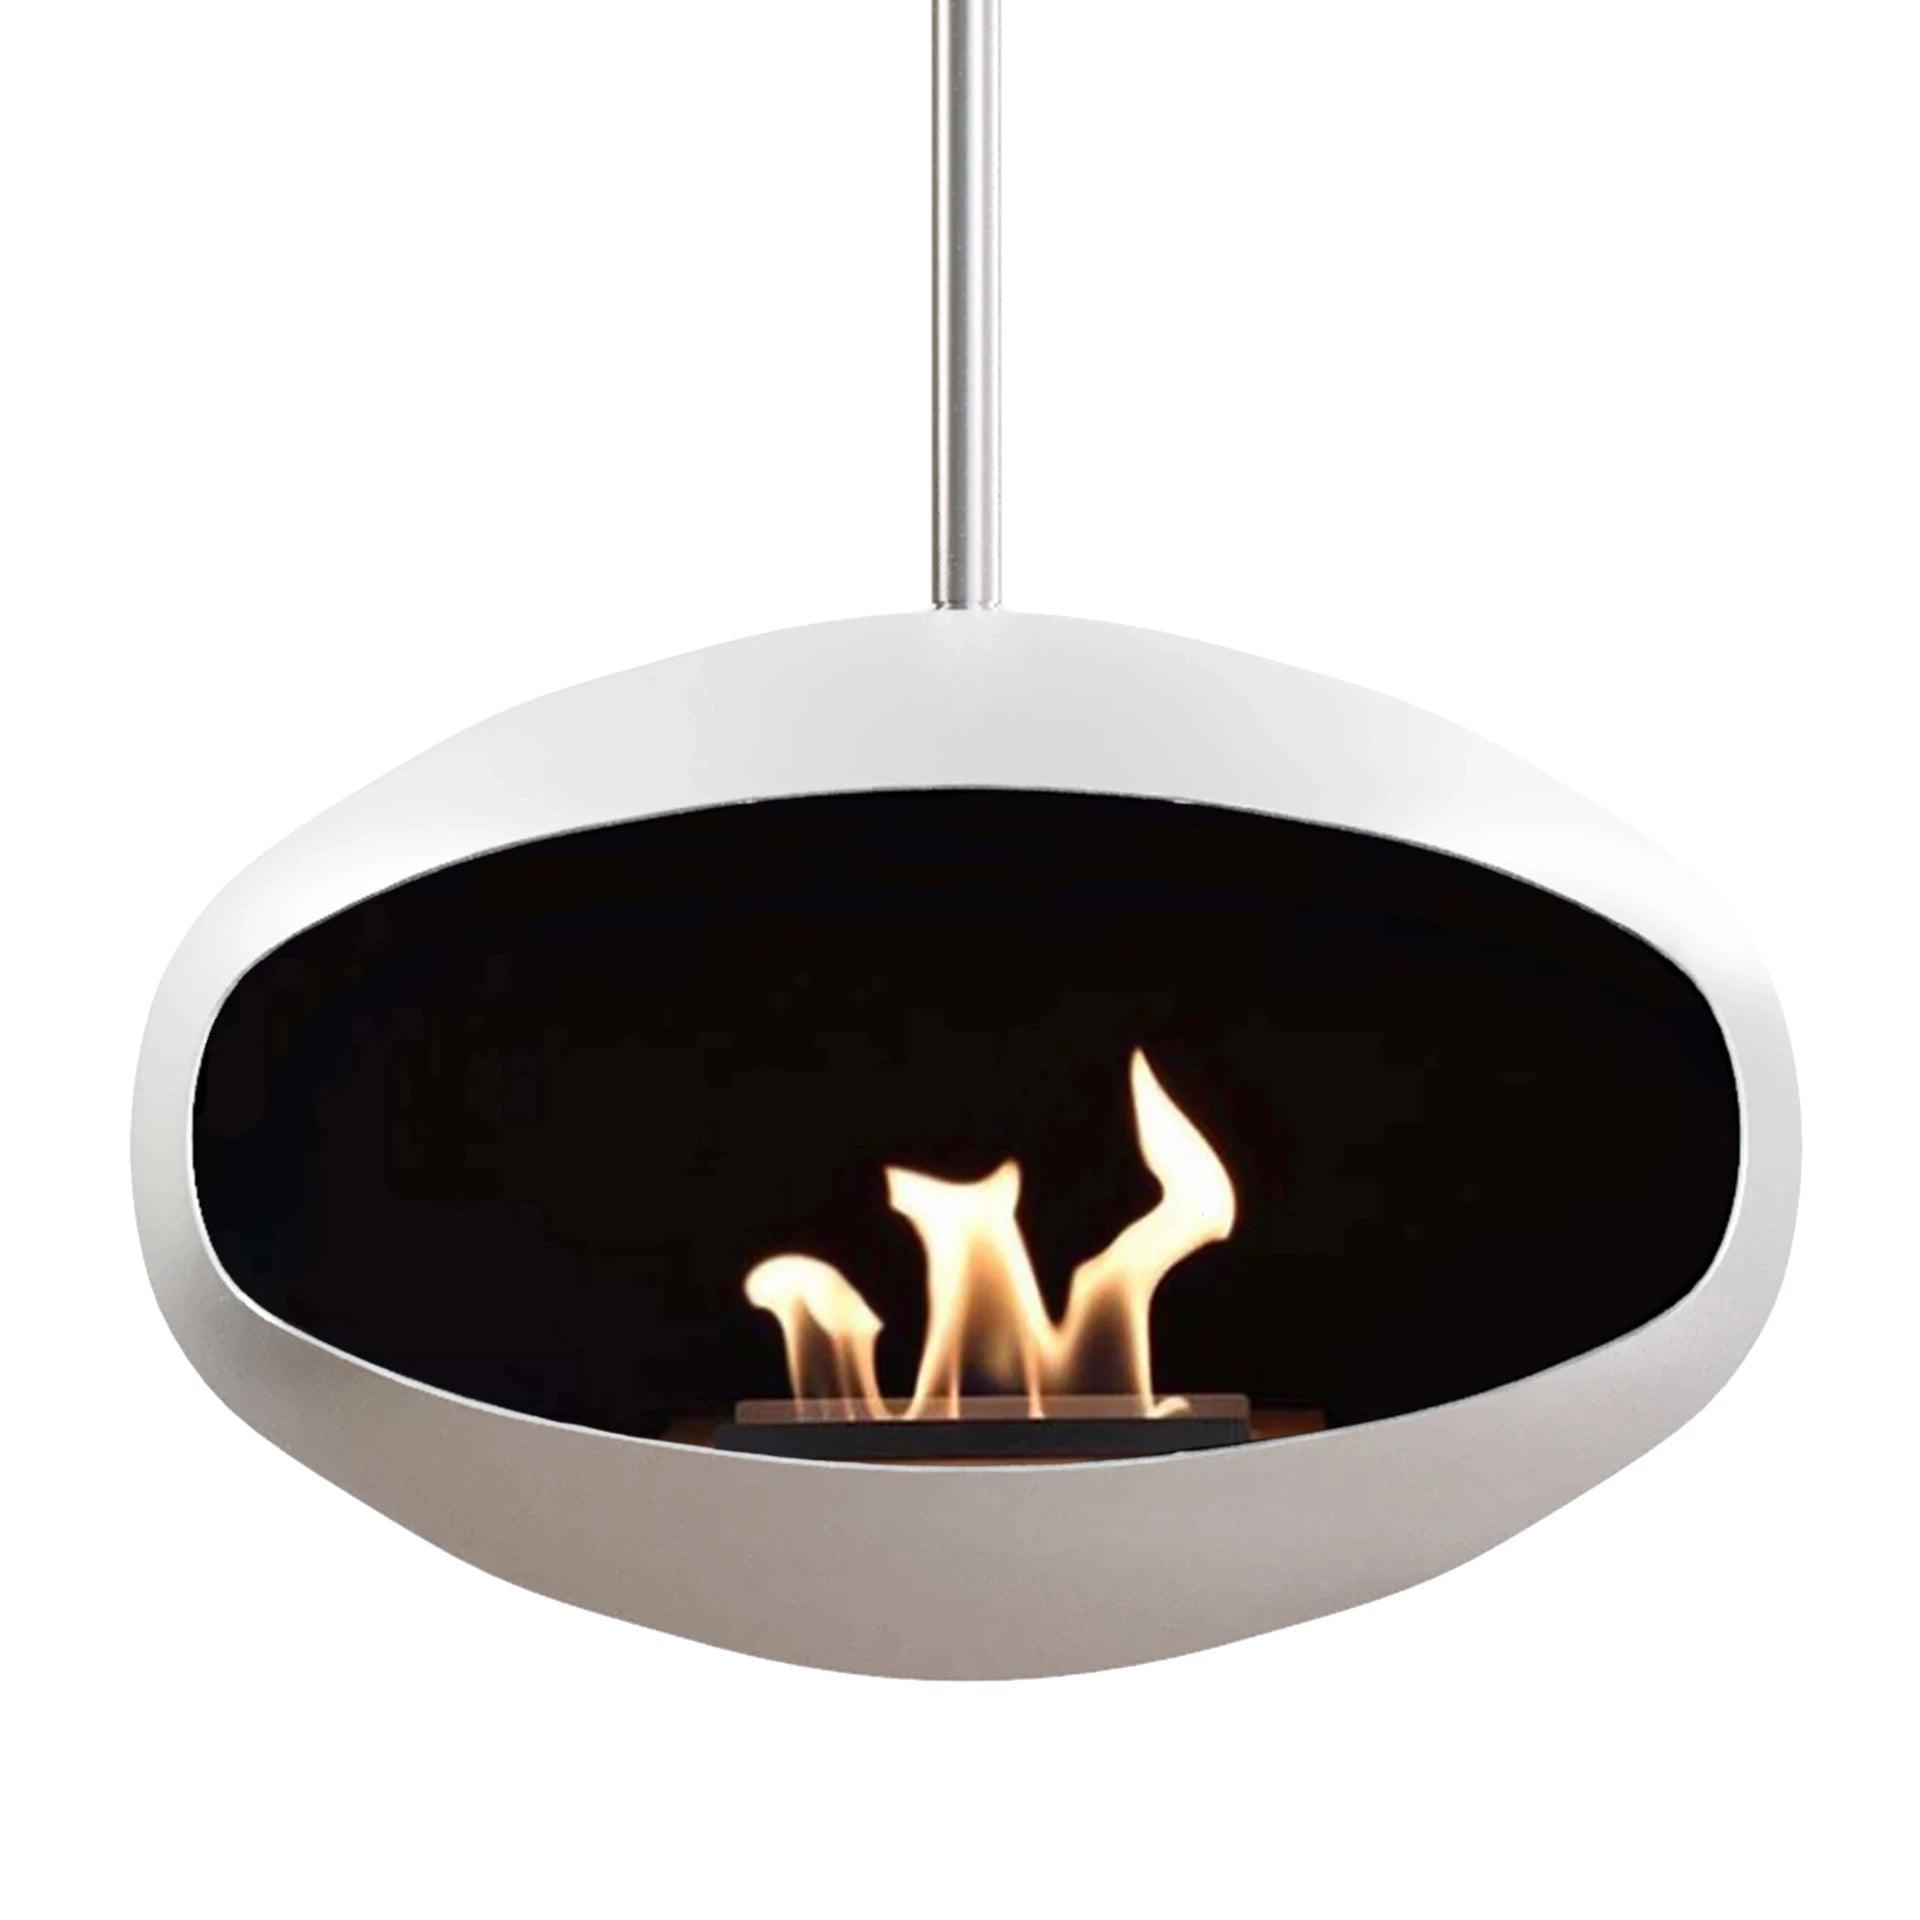 Cocoon Aeris Ceiling Mounted Bioethanol Fireplace-Various Finishes - Gardens Of Style